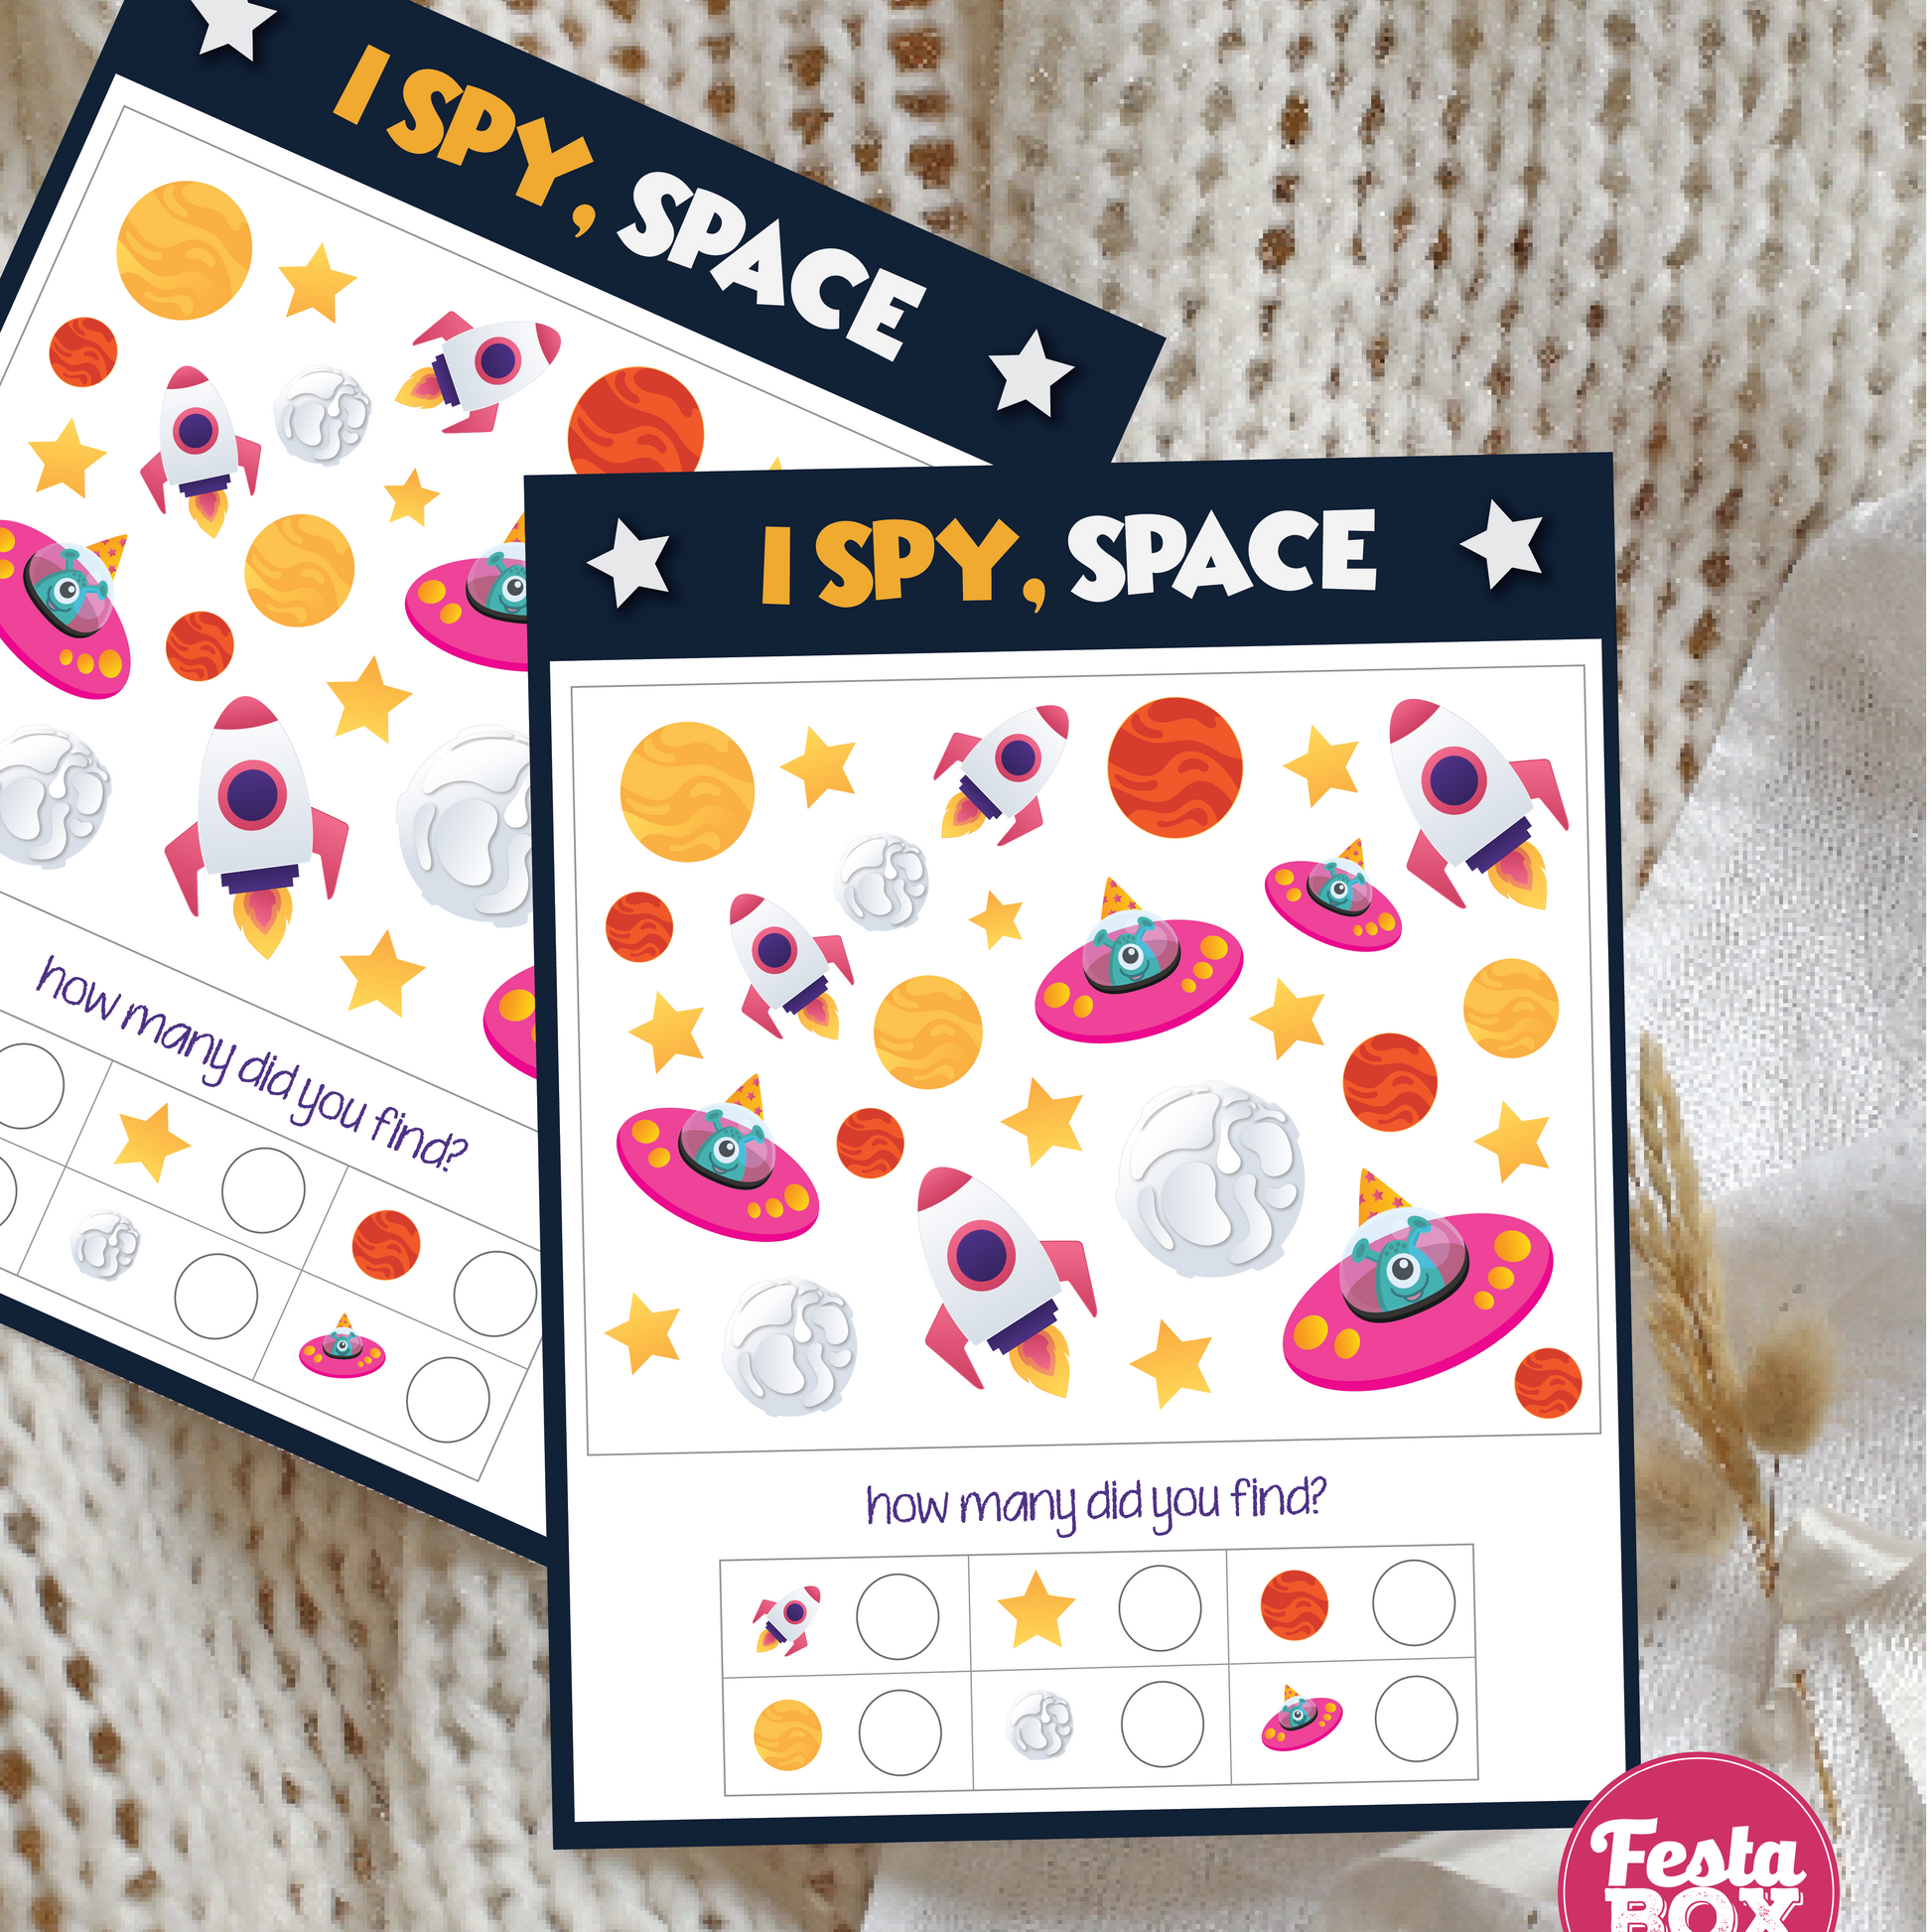 I Spy Game under Space Theme by Festabox for Birthday Party Decorations